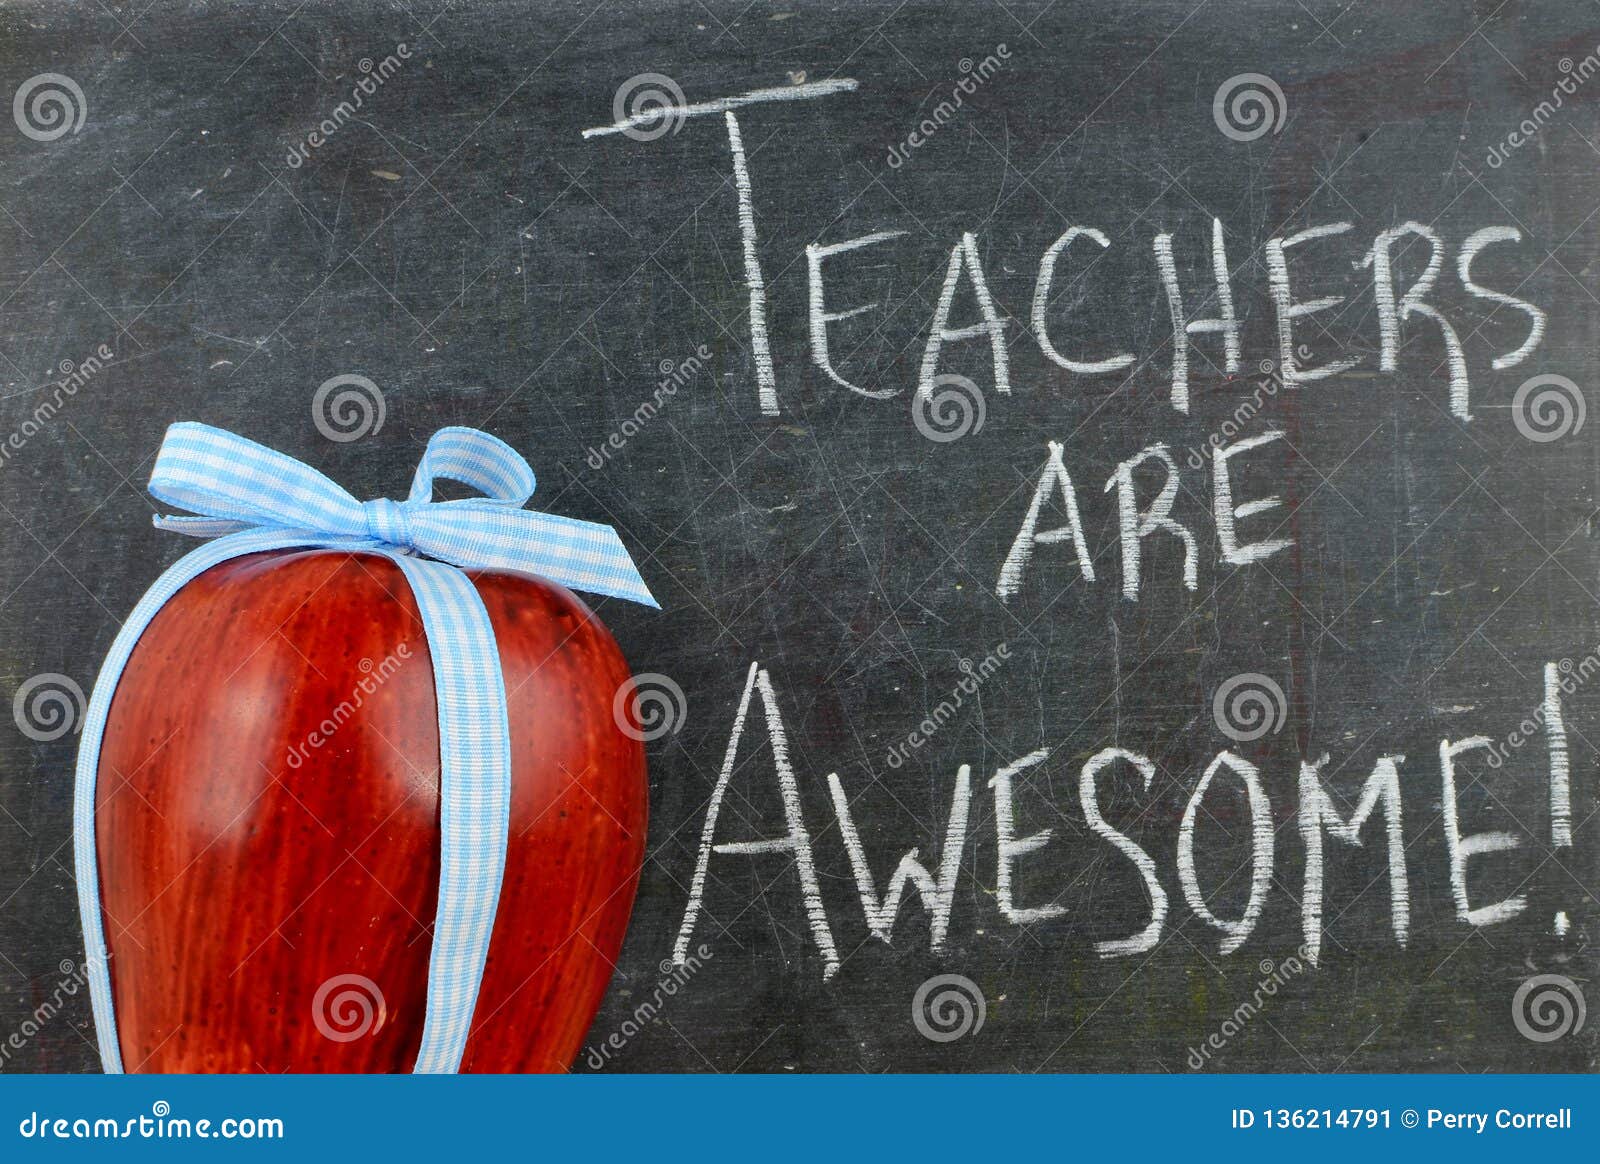 teacher appreciation image of a red apple tied up with a cute blue ribbon